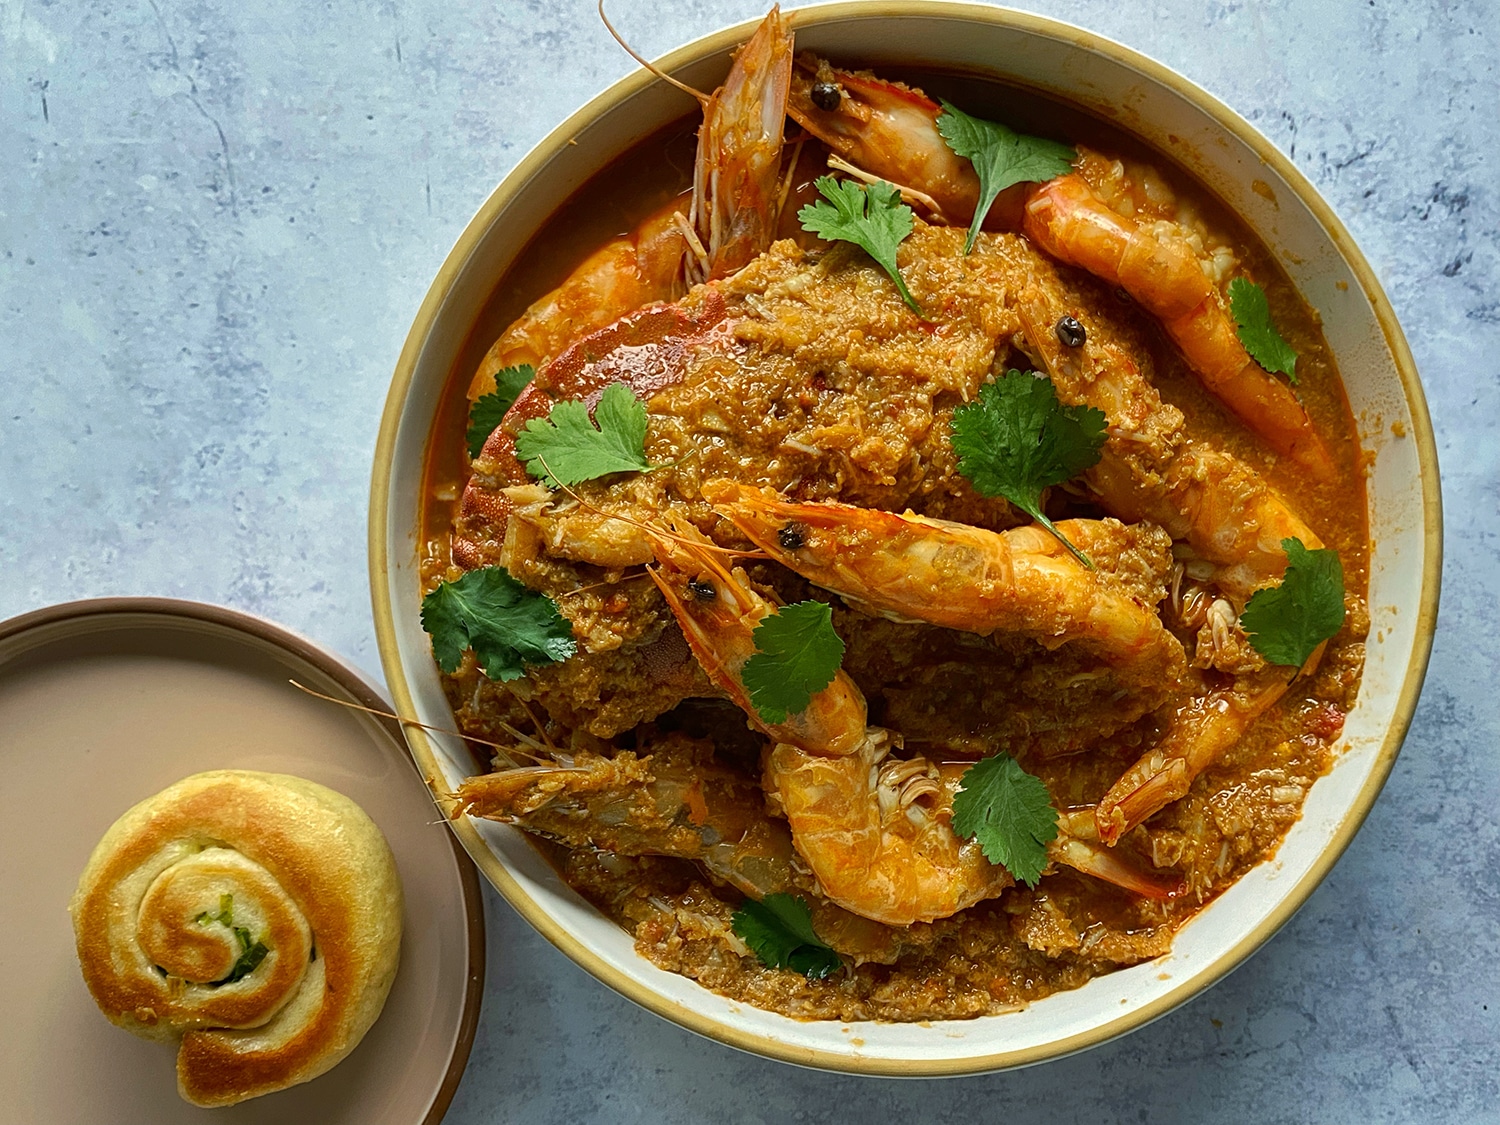 Singapore-style chilli seafood made with Borough Market ingredients